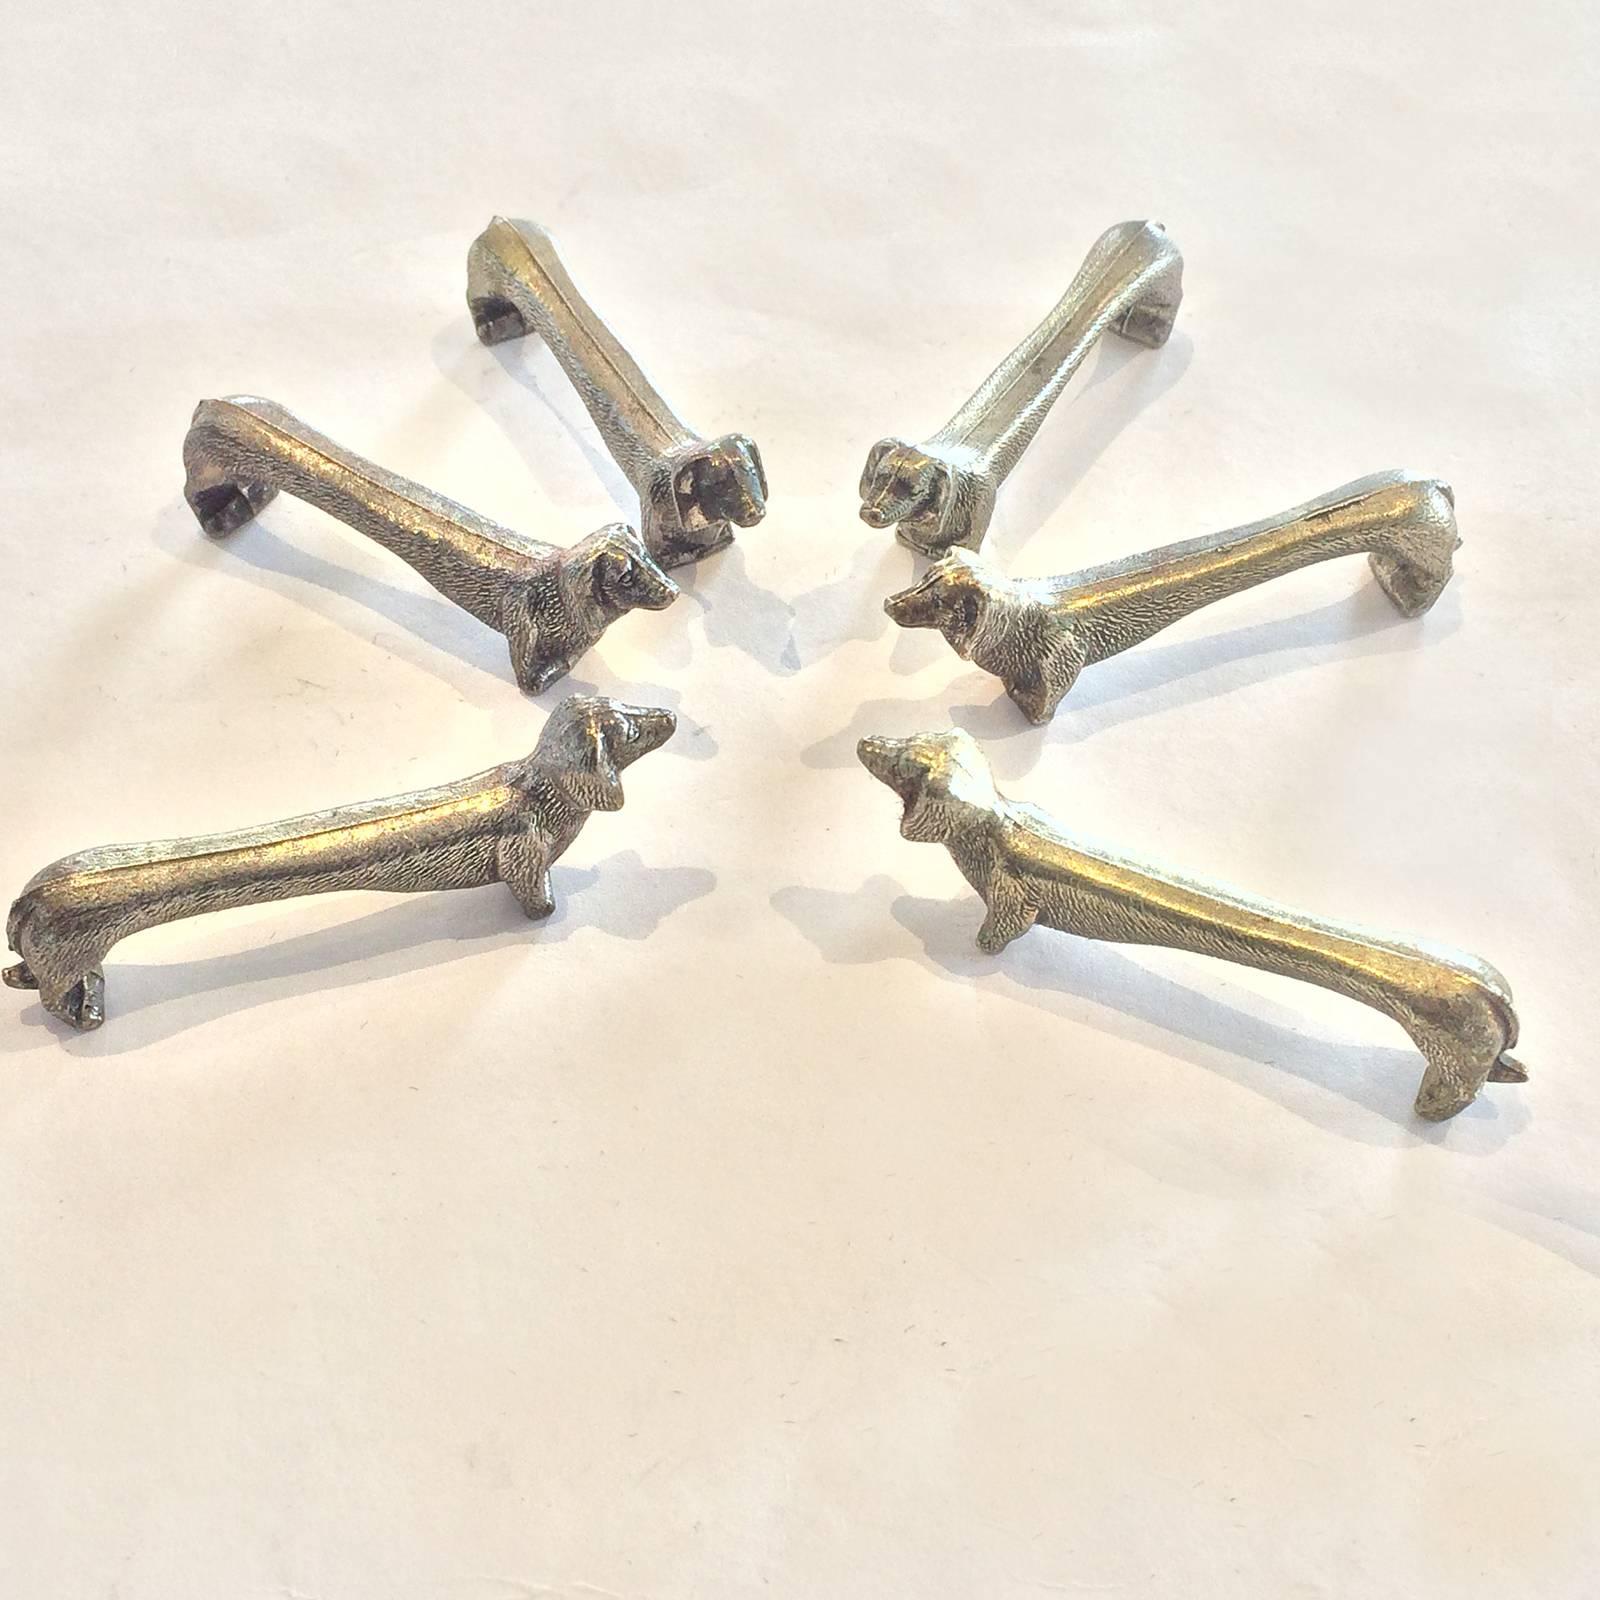 Art Deco French set of six knife rests in form of Long Haired Dachshunds, in nickel. All in fine detail and all in excellent condition with soft aged patina, no damage, no repairs or loses. Dimensions are approximate: 6cm long x 2cm high x 8mm deep.